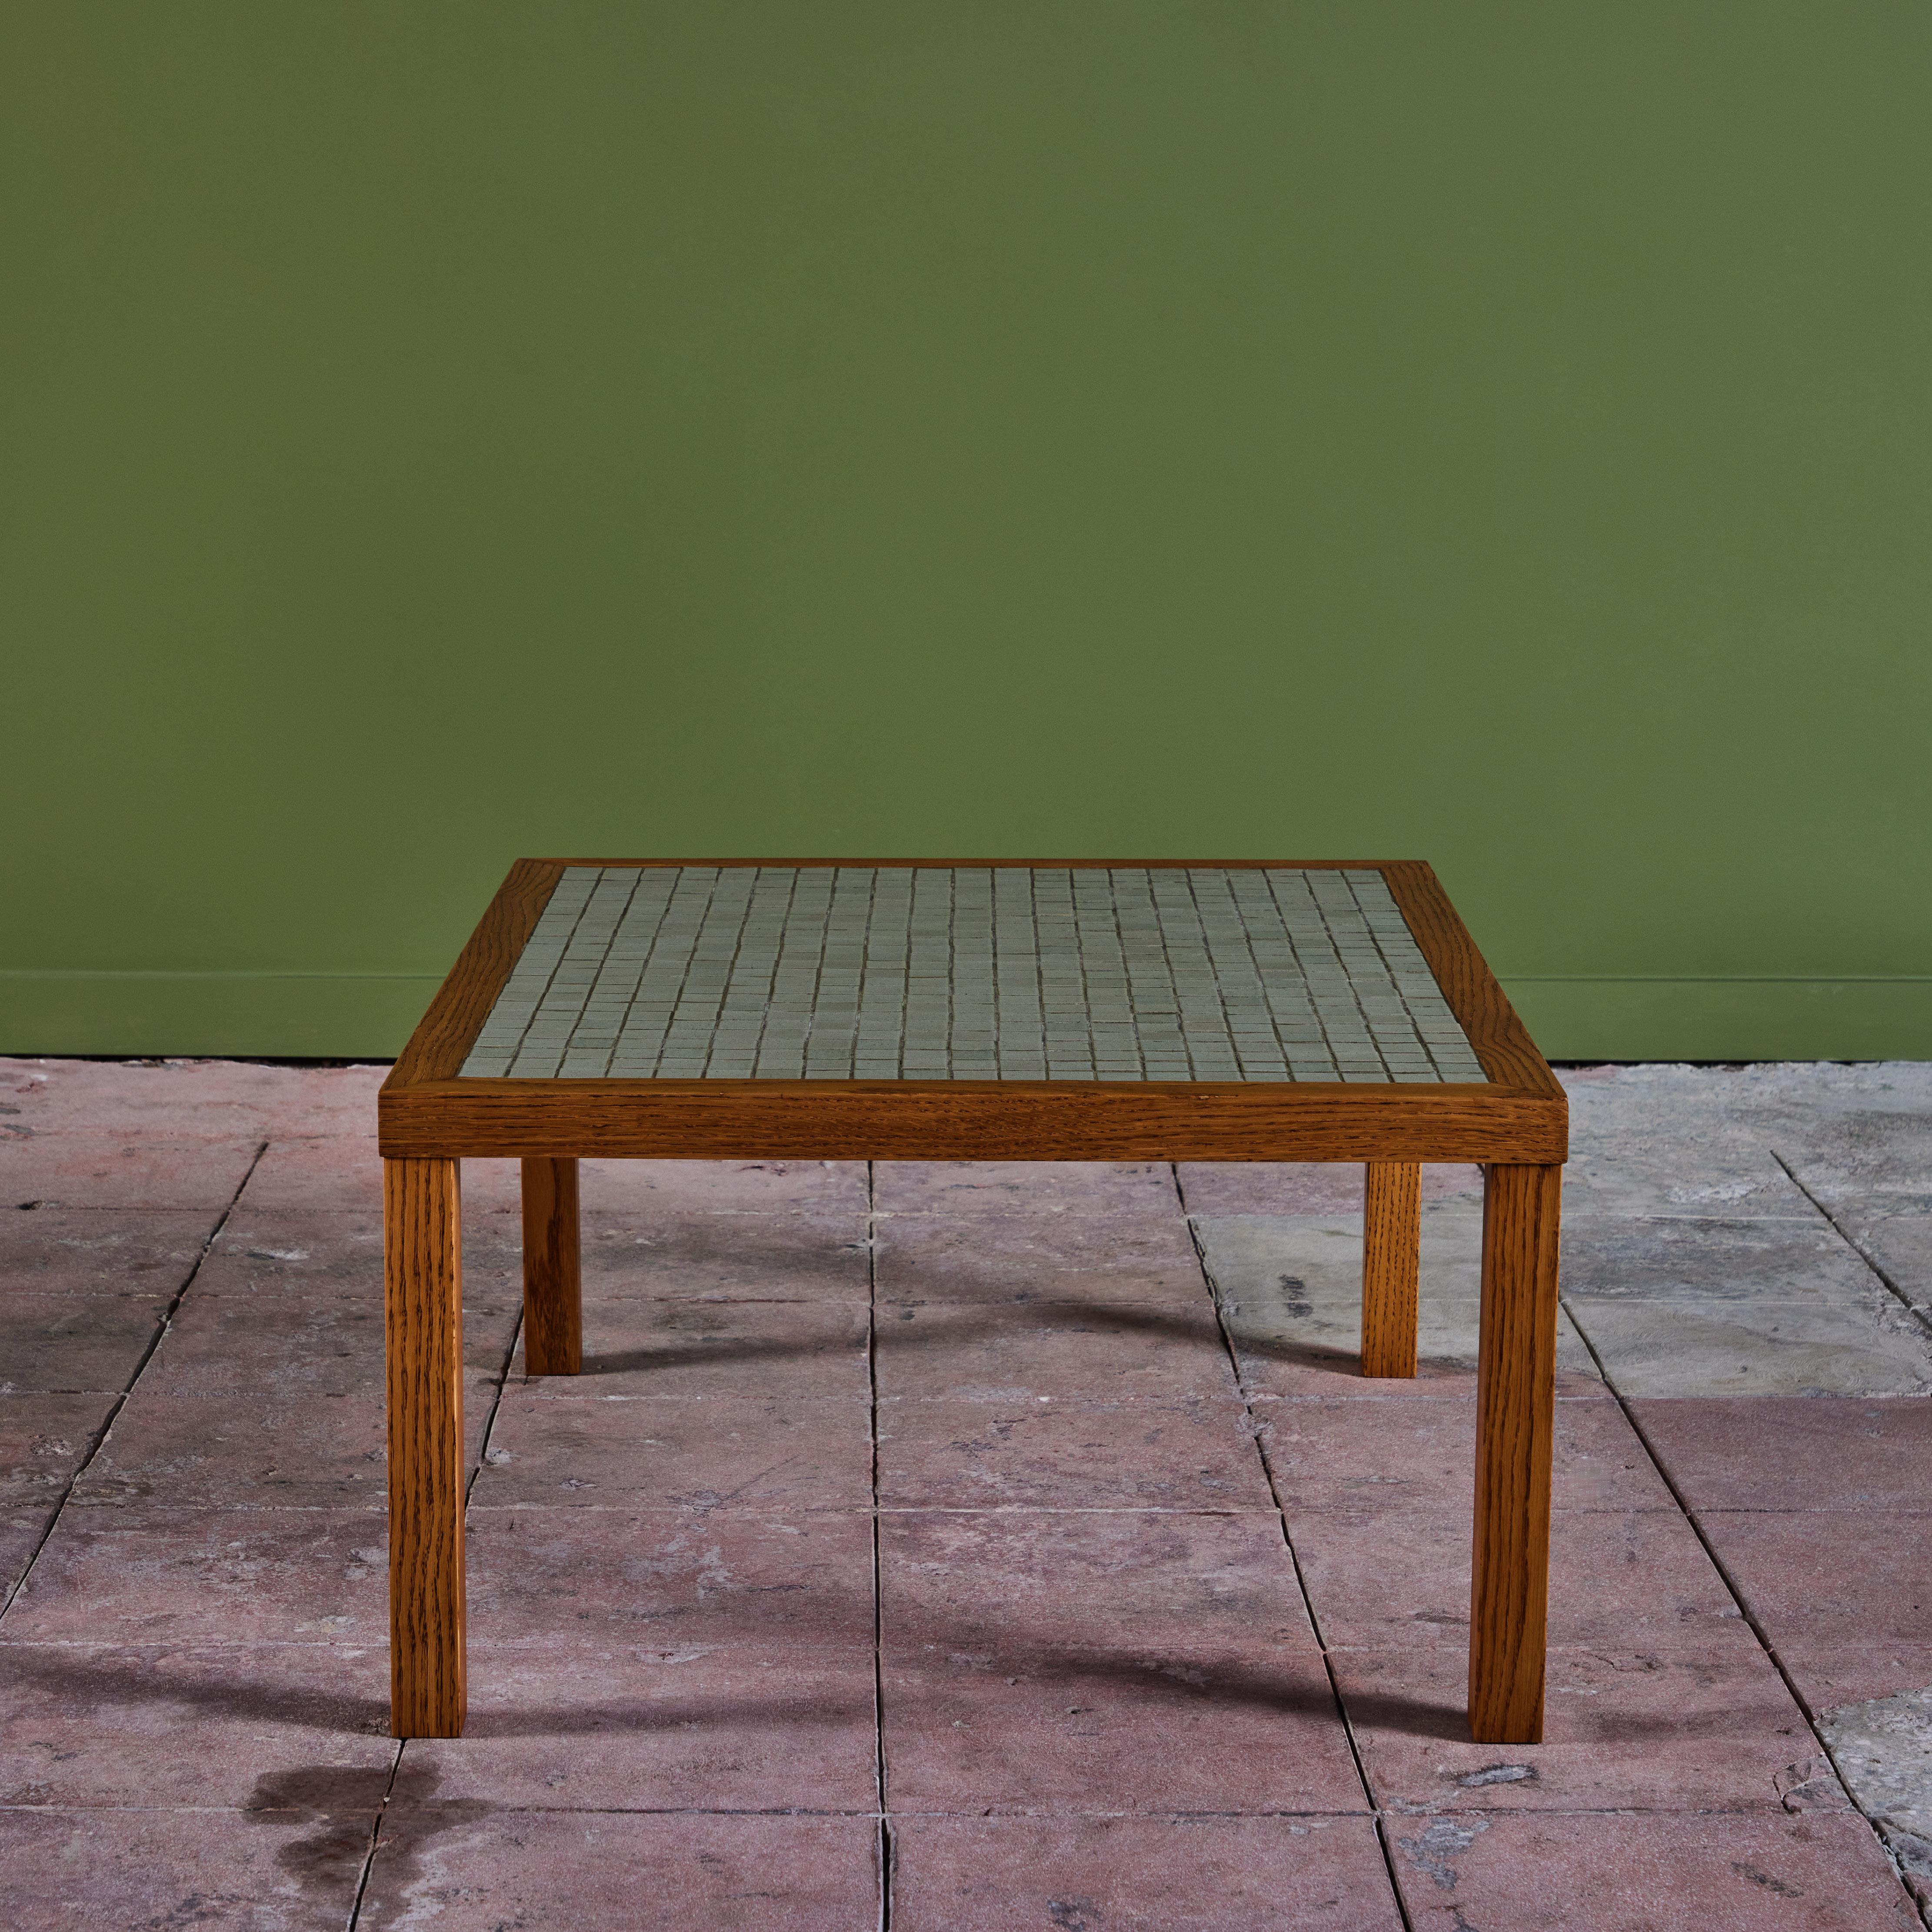 Gordon & Jane Martz Rectangular Mosaic Tile Coffee Table In Excellent Condition For Sale In Los Angeles, CA